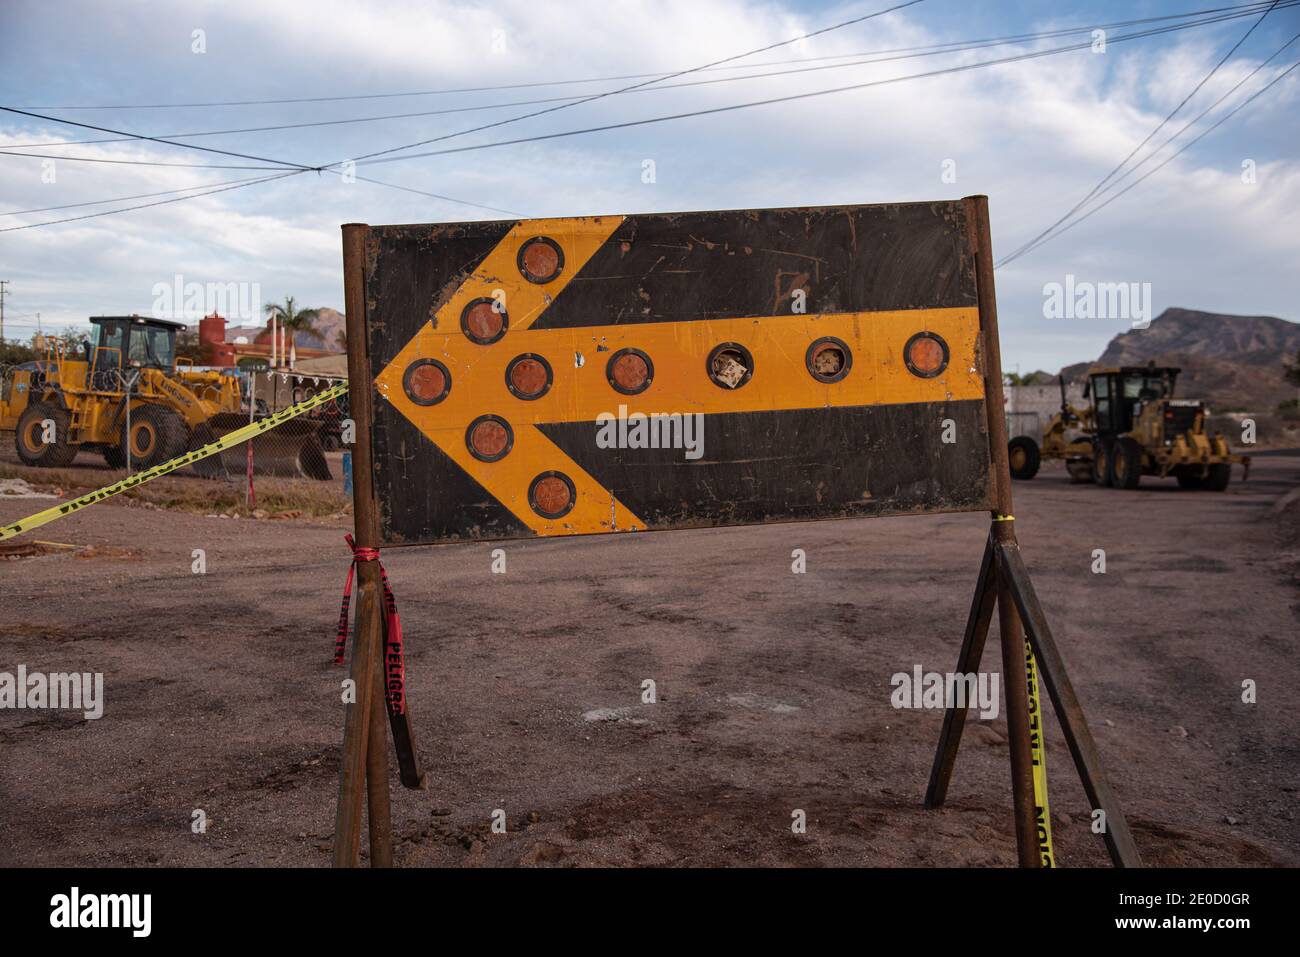 Closeup of warning sign with large orange arrow with reflectors, yellow construction equipment in soft focus in background, San Carlos, Sonora, Mx. Stock Photo